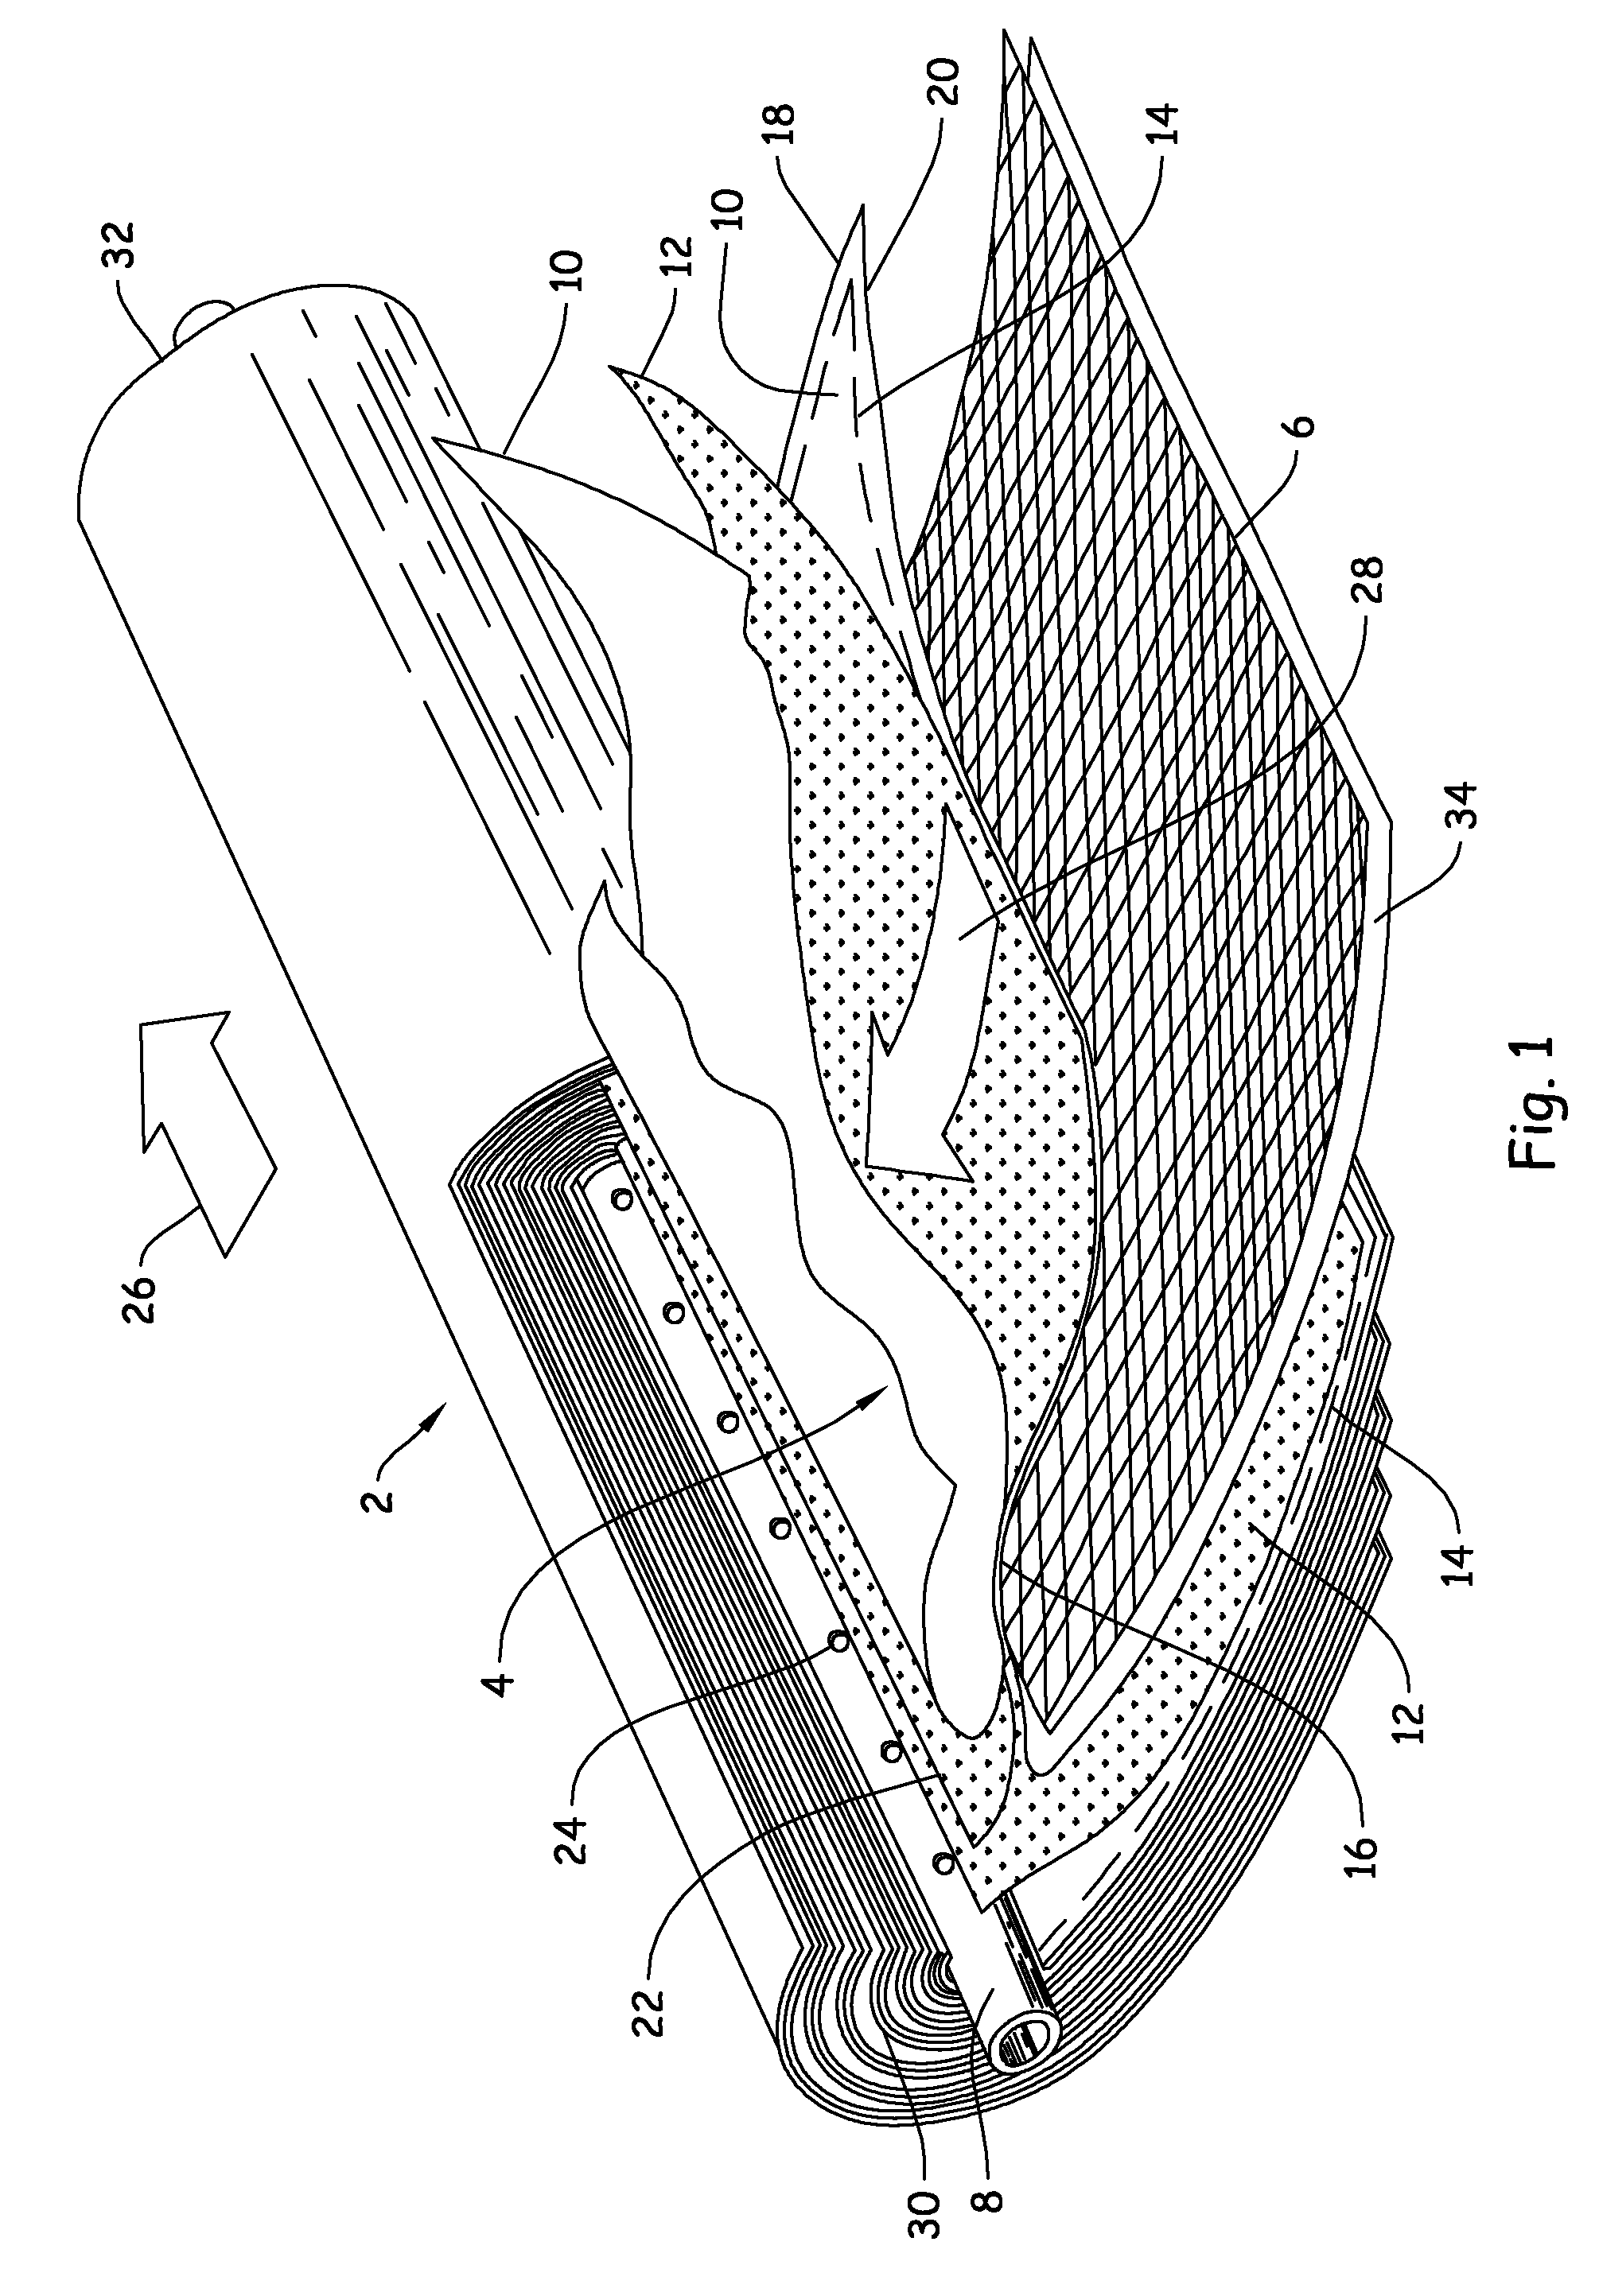 Method for applying tape layer to outer periphery of spiral wound module